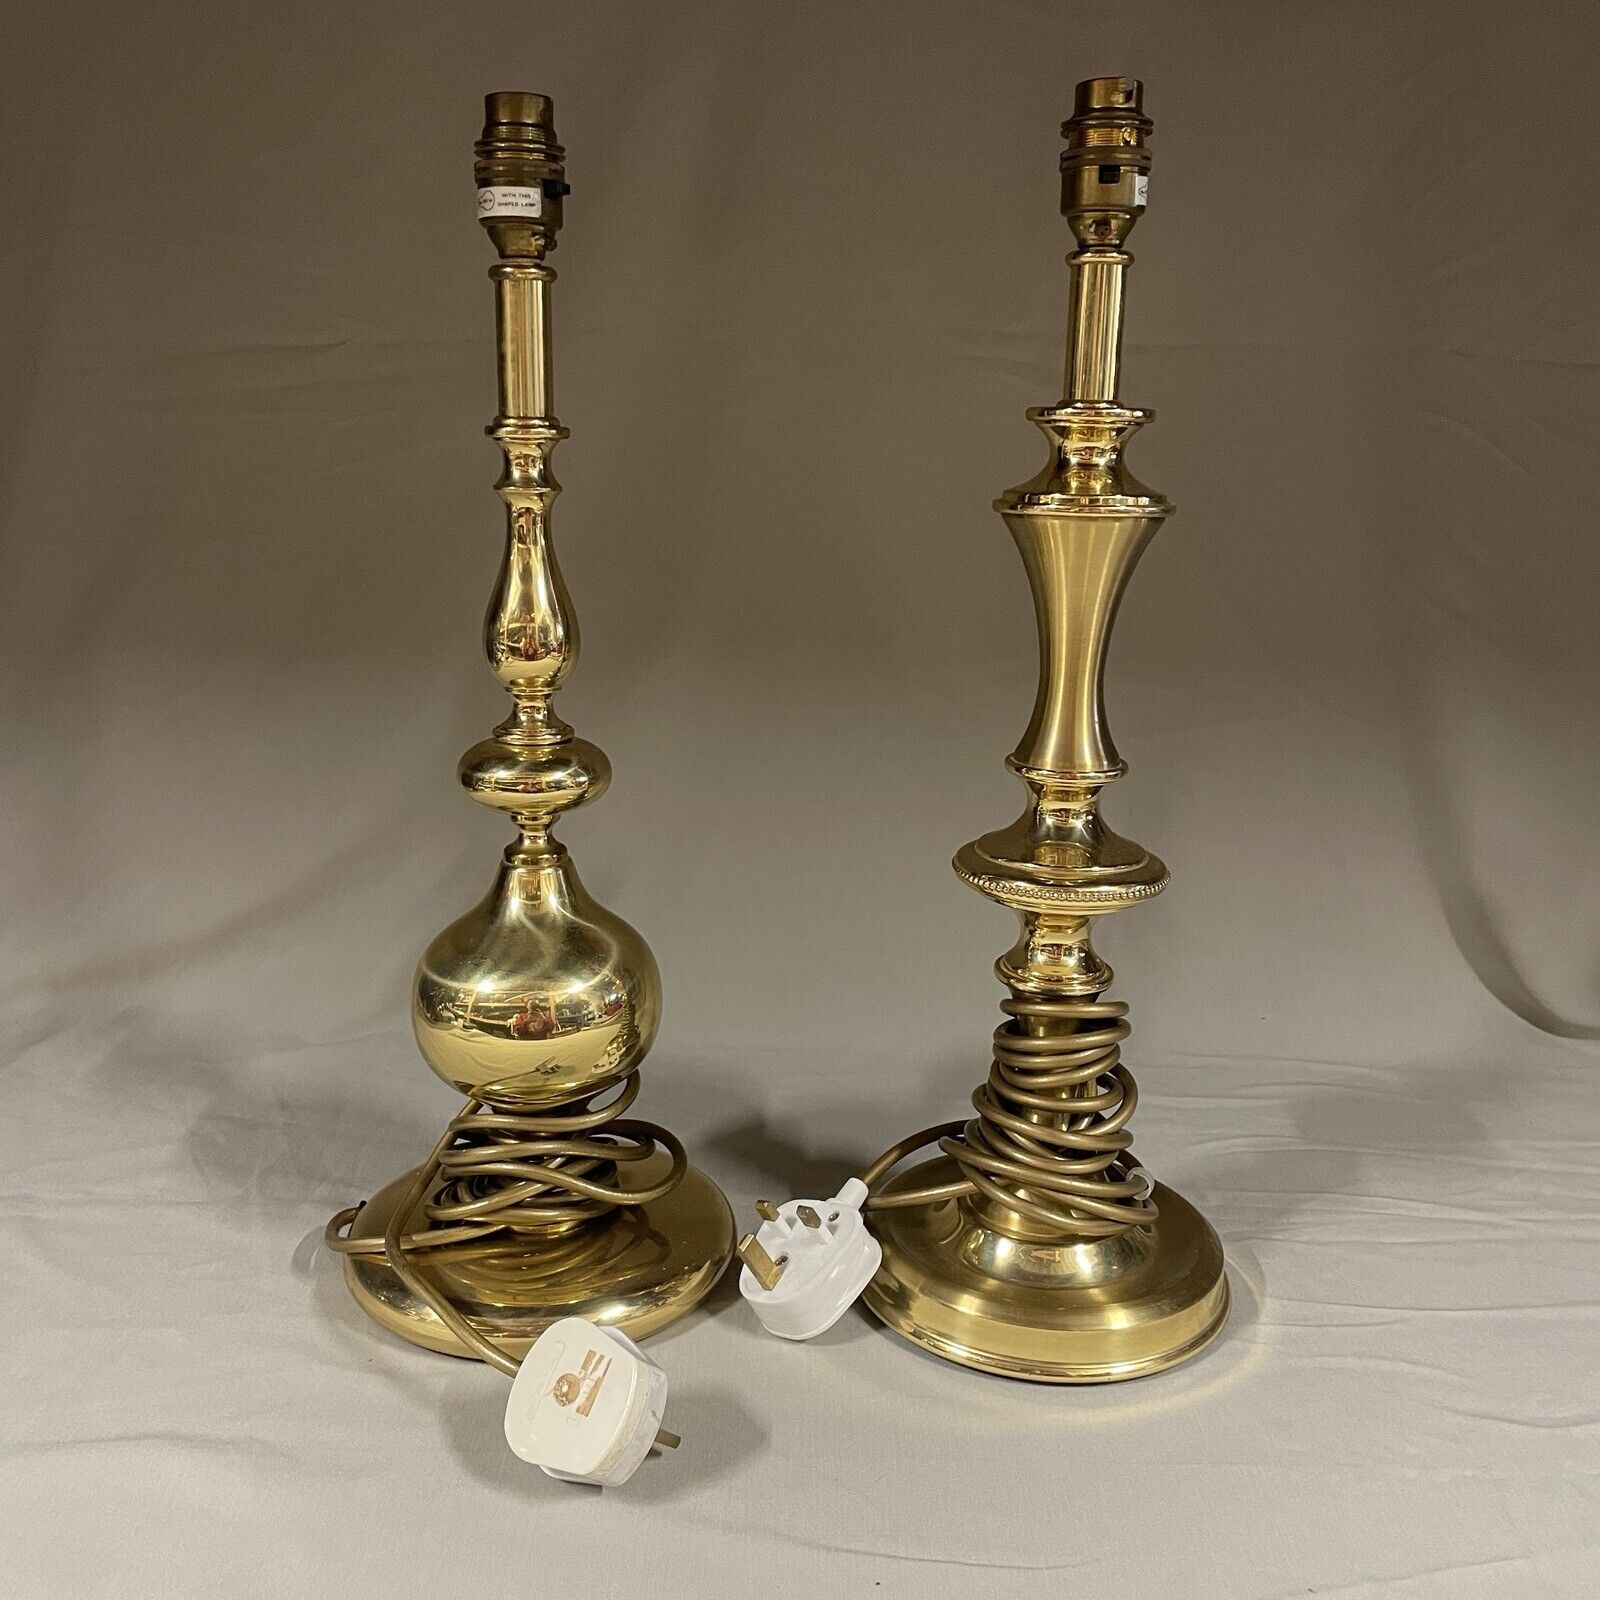 Vintage Brass Lamps Bundle x2 Good Working Condition Large 45cm Tall